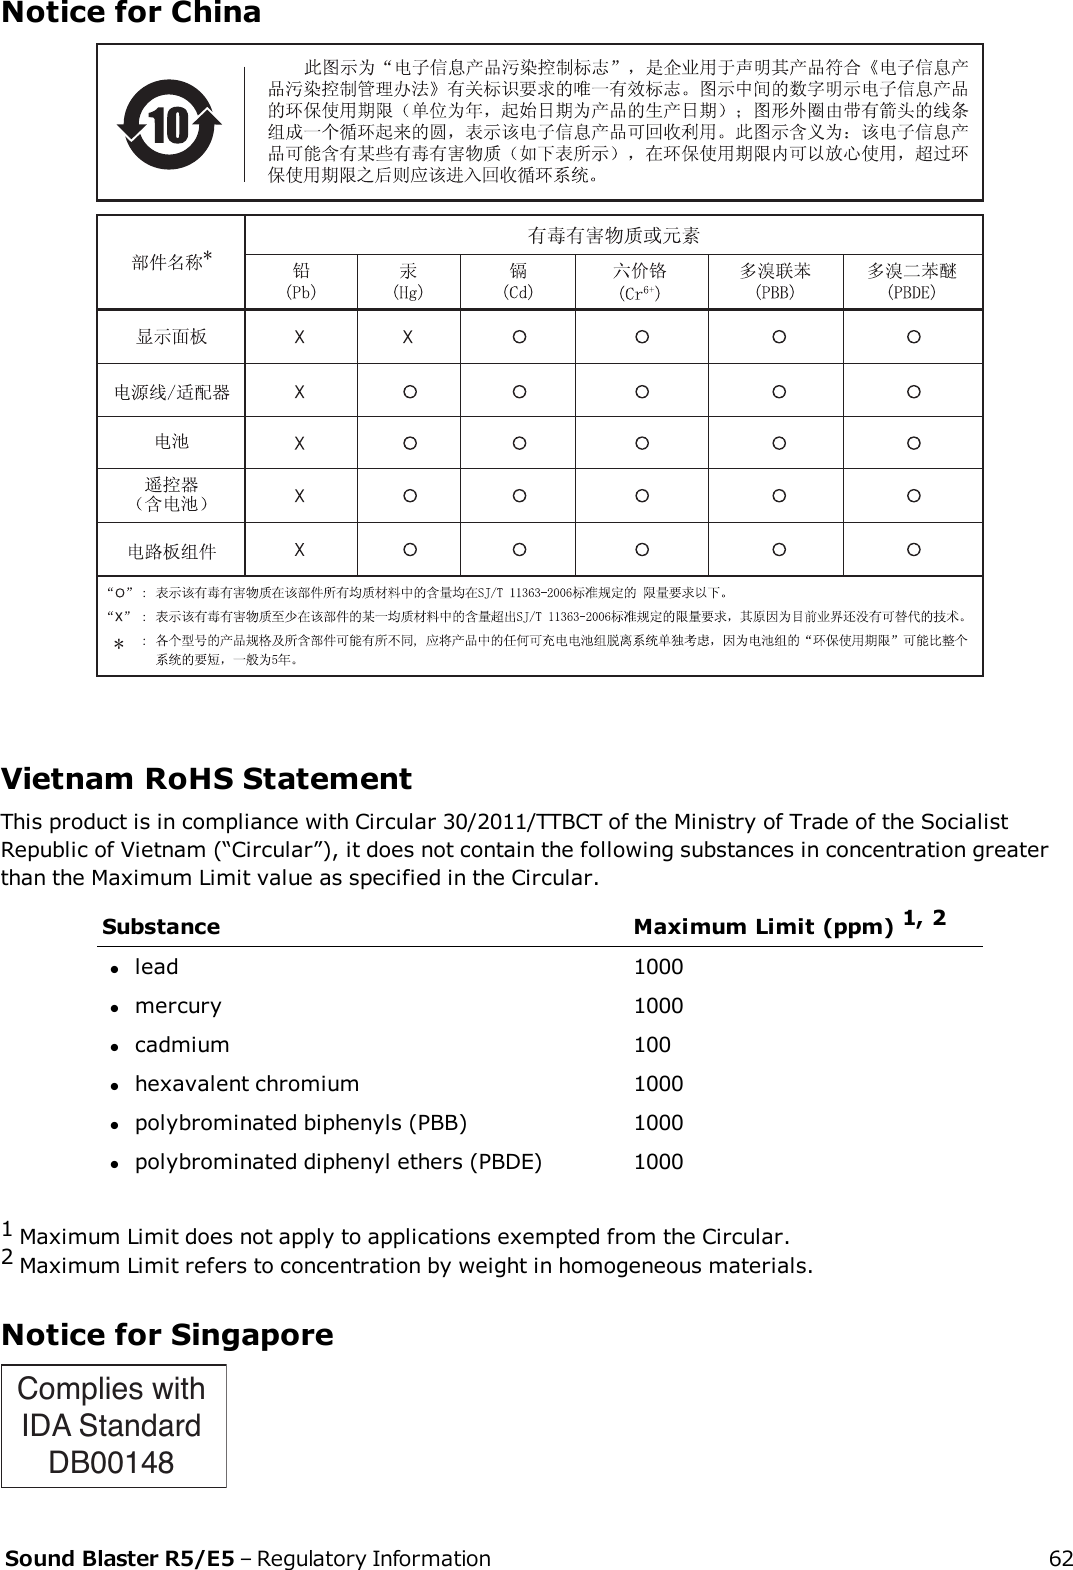 Notice for ChinaVietnam RoHS StatementThis product is in compliance with Circular 30/2011/TTBCT of the Ministry of Trade of the SocialistRepublic of Vietnam (“Circular”), it does not contain the following substances in concentration greaterthan the Maximum Limit value as specified in the Circular.Substance Maximum Limit (ppm) 1, 2llead 1000lmercury 1000lcadmium 100lhexavalent chromium 1000lpolybrominated biphenyls (PBB) 1000lpolybrominated diphenyl ethers (PBDE) 10001Maximum Limit does not apply to applications exempted from the Circular.2Maximum Limit refers to concentration by weight in homogeneous materials.Notice for SingaporeComplies withIDA StandardDB00148Sound Blaster R5/E5 – Regulatory Information 62